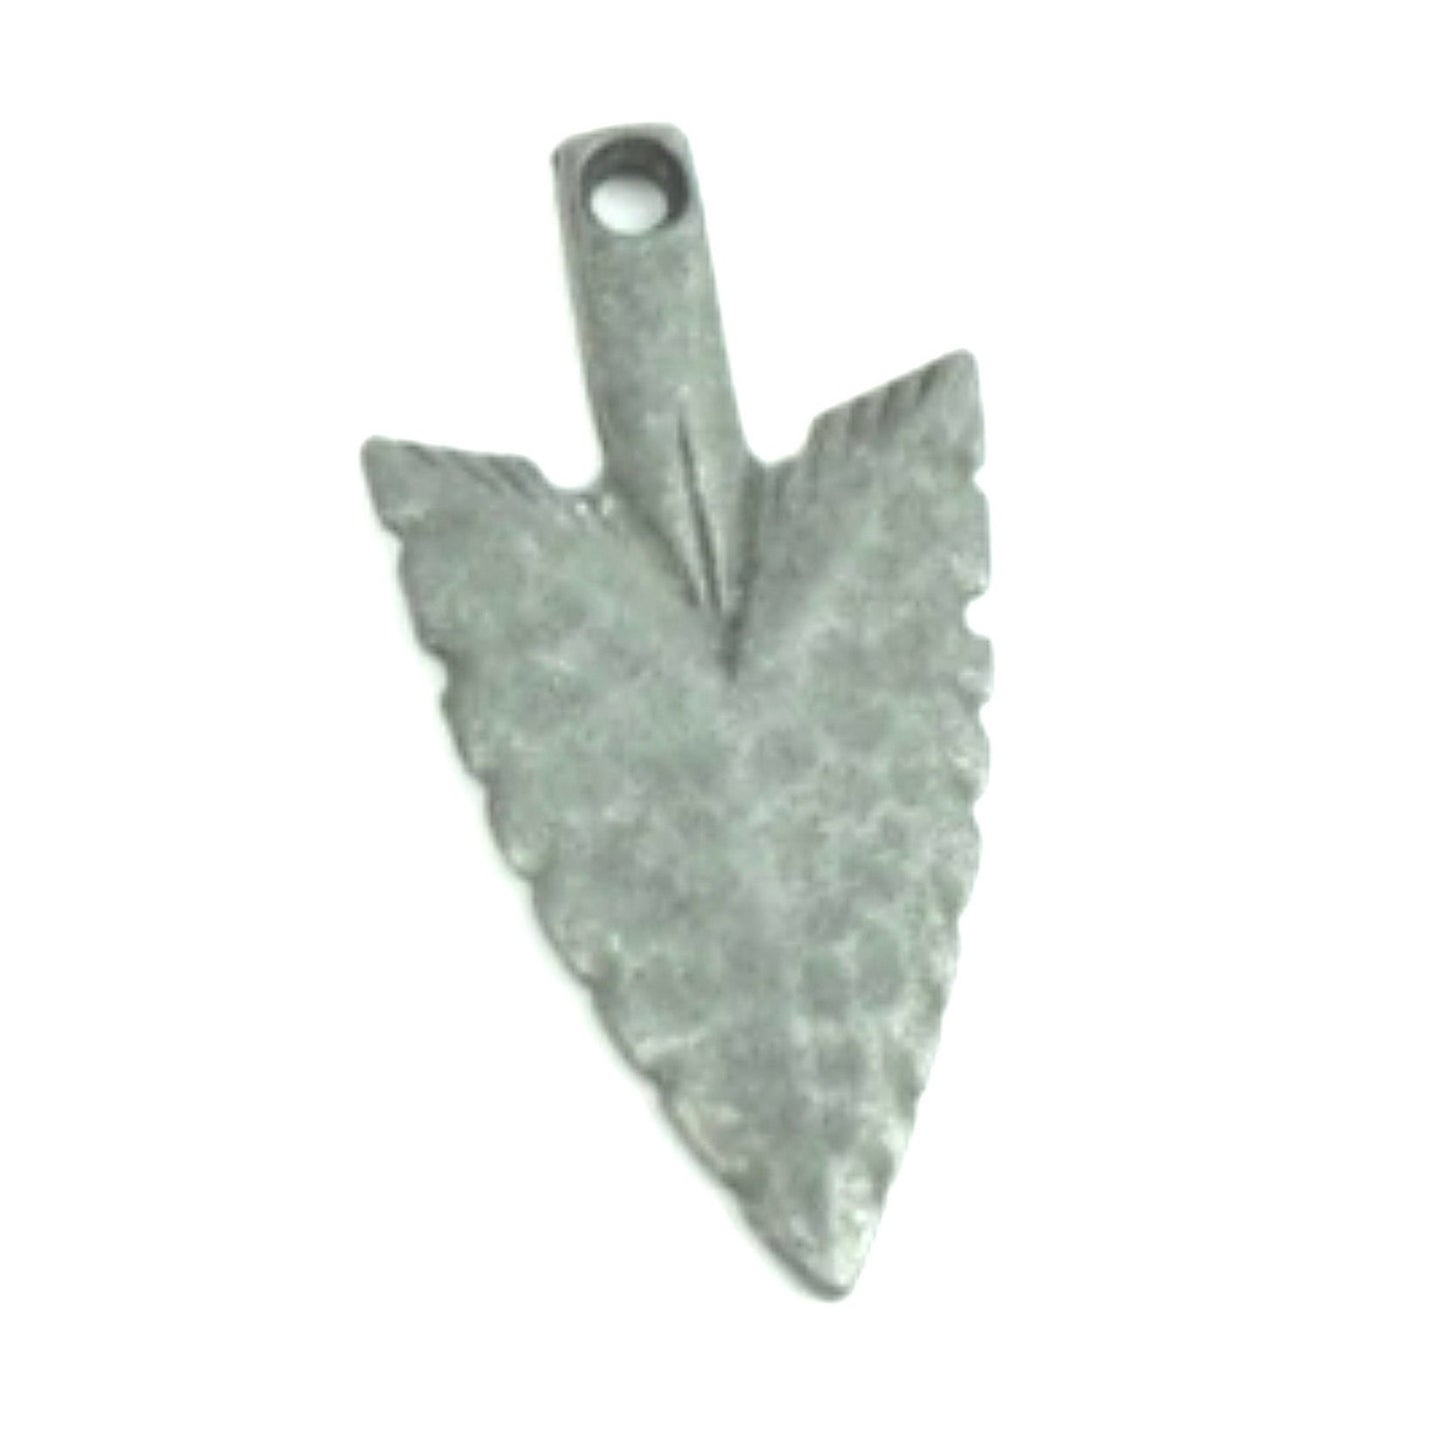 32mm Arrowhead Charm or Pendant, Classic Silver, Antique Copper or Gunmetal Gray, Made in USA, Pack of 6